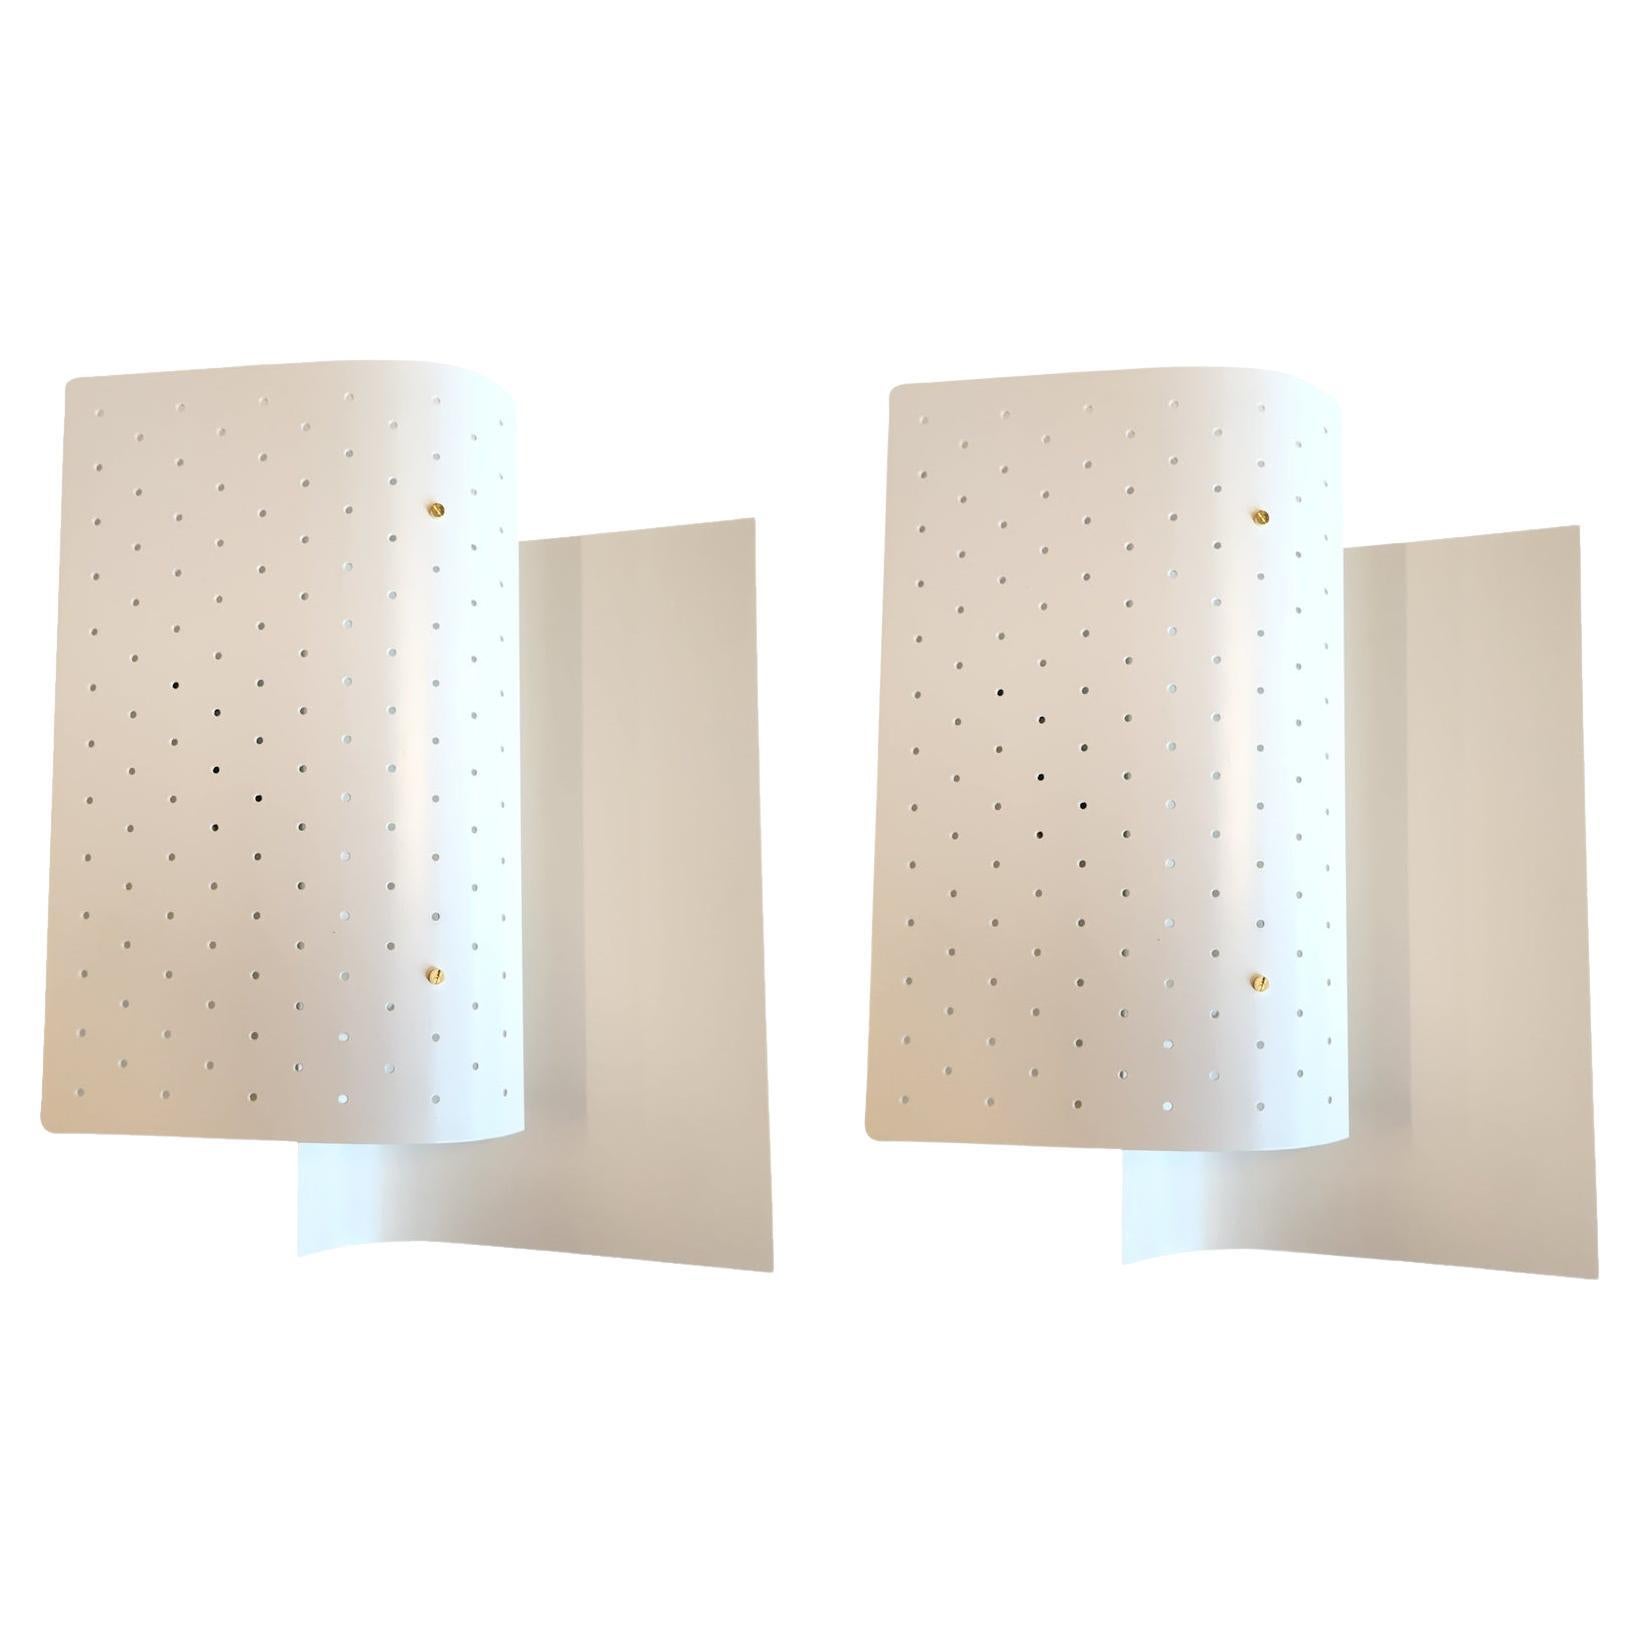 Michel Buffet - Pair of White Sconces B205 - IN STOCK!